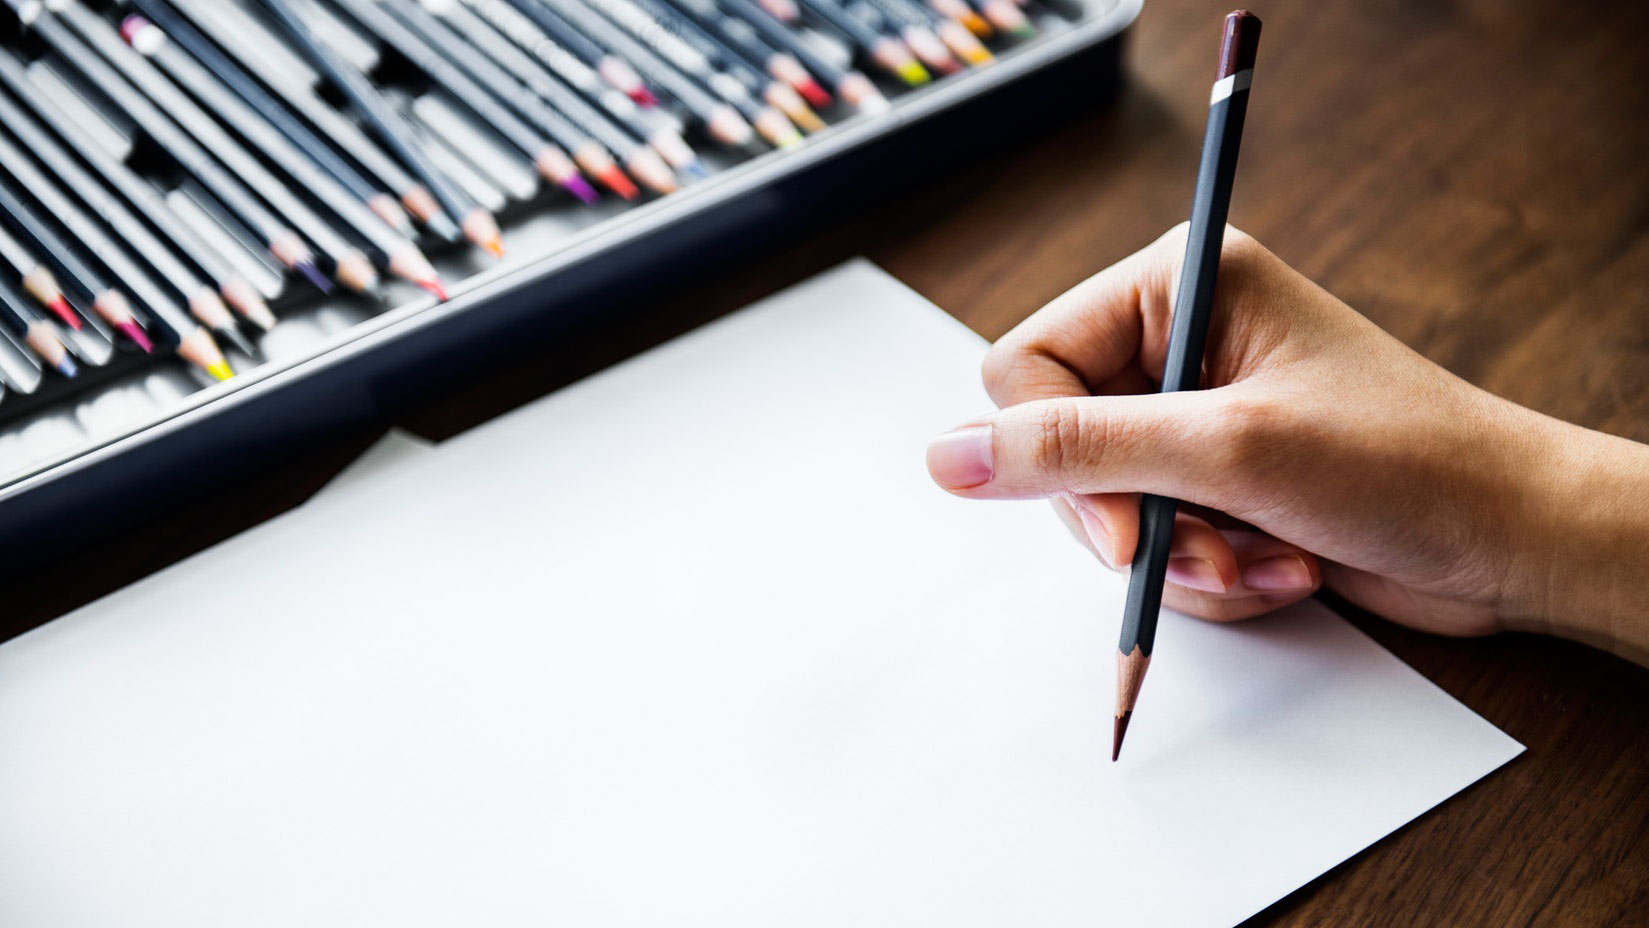 How to choose the right drawing tools | Creative Bloq